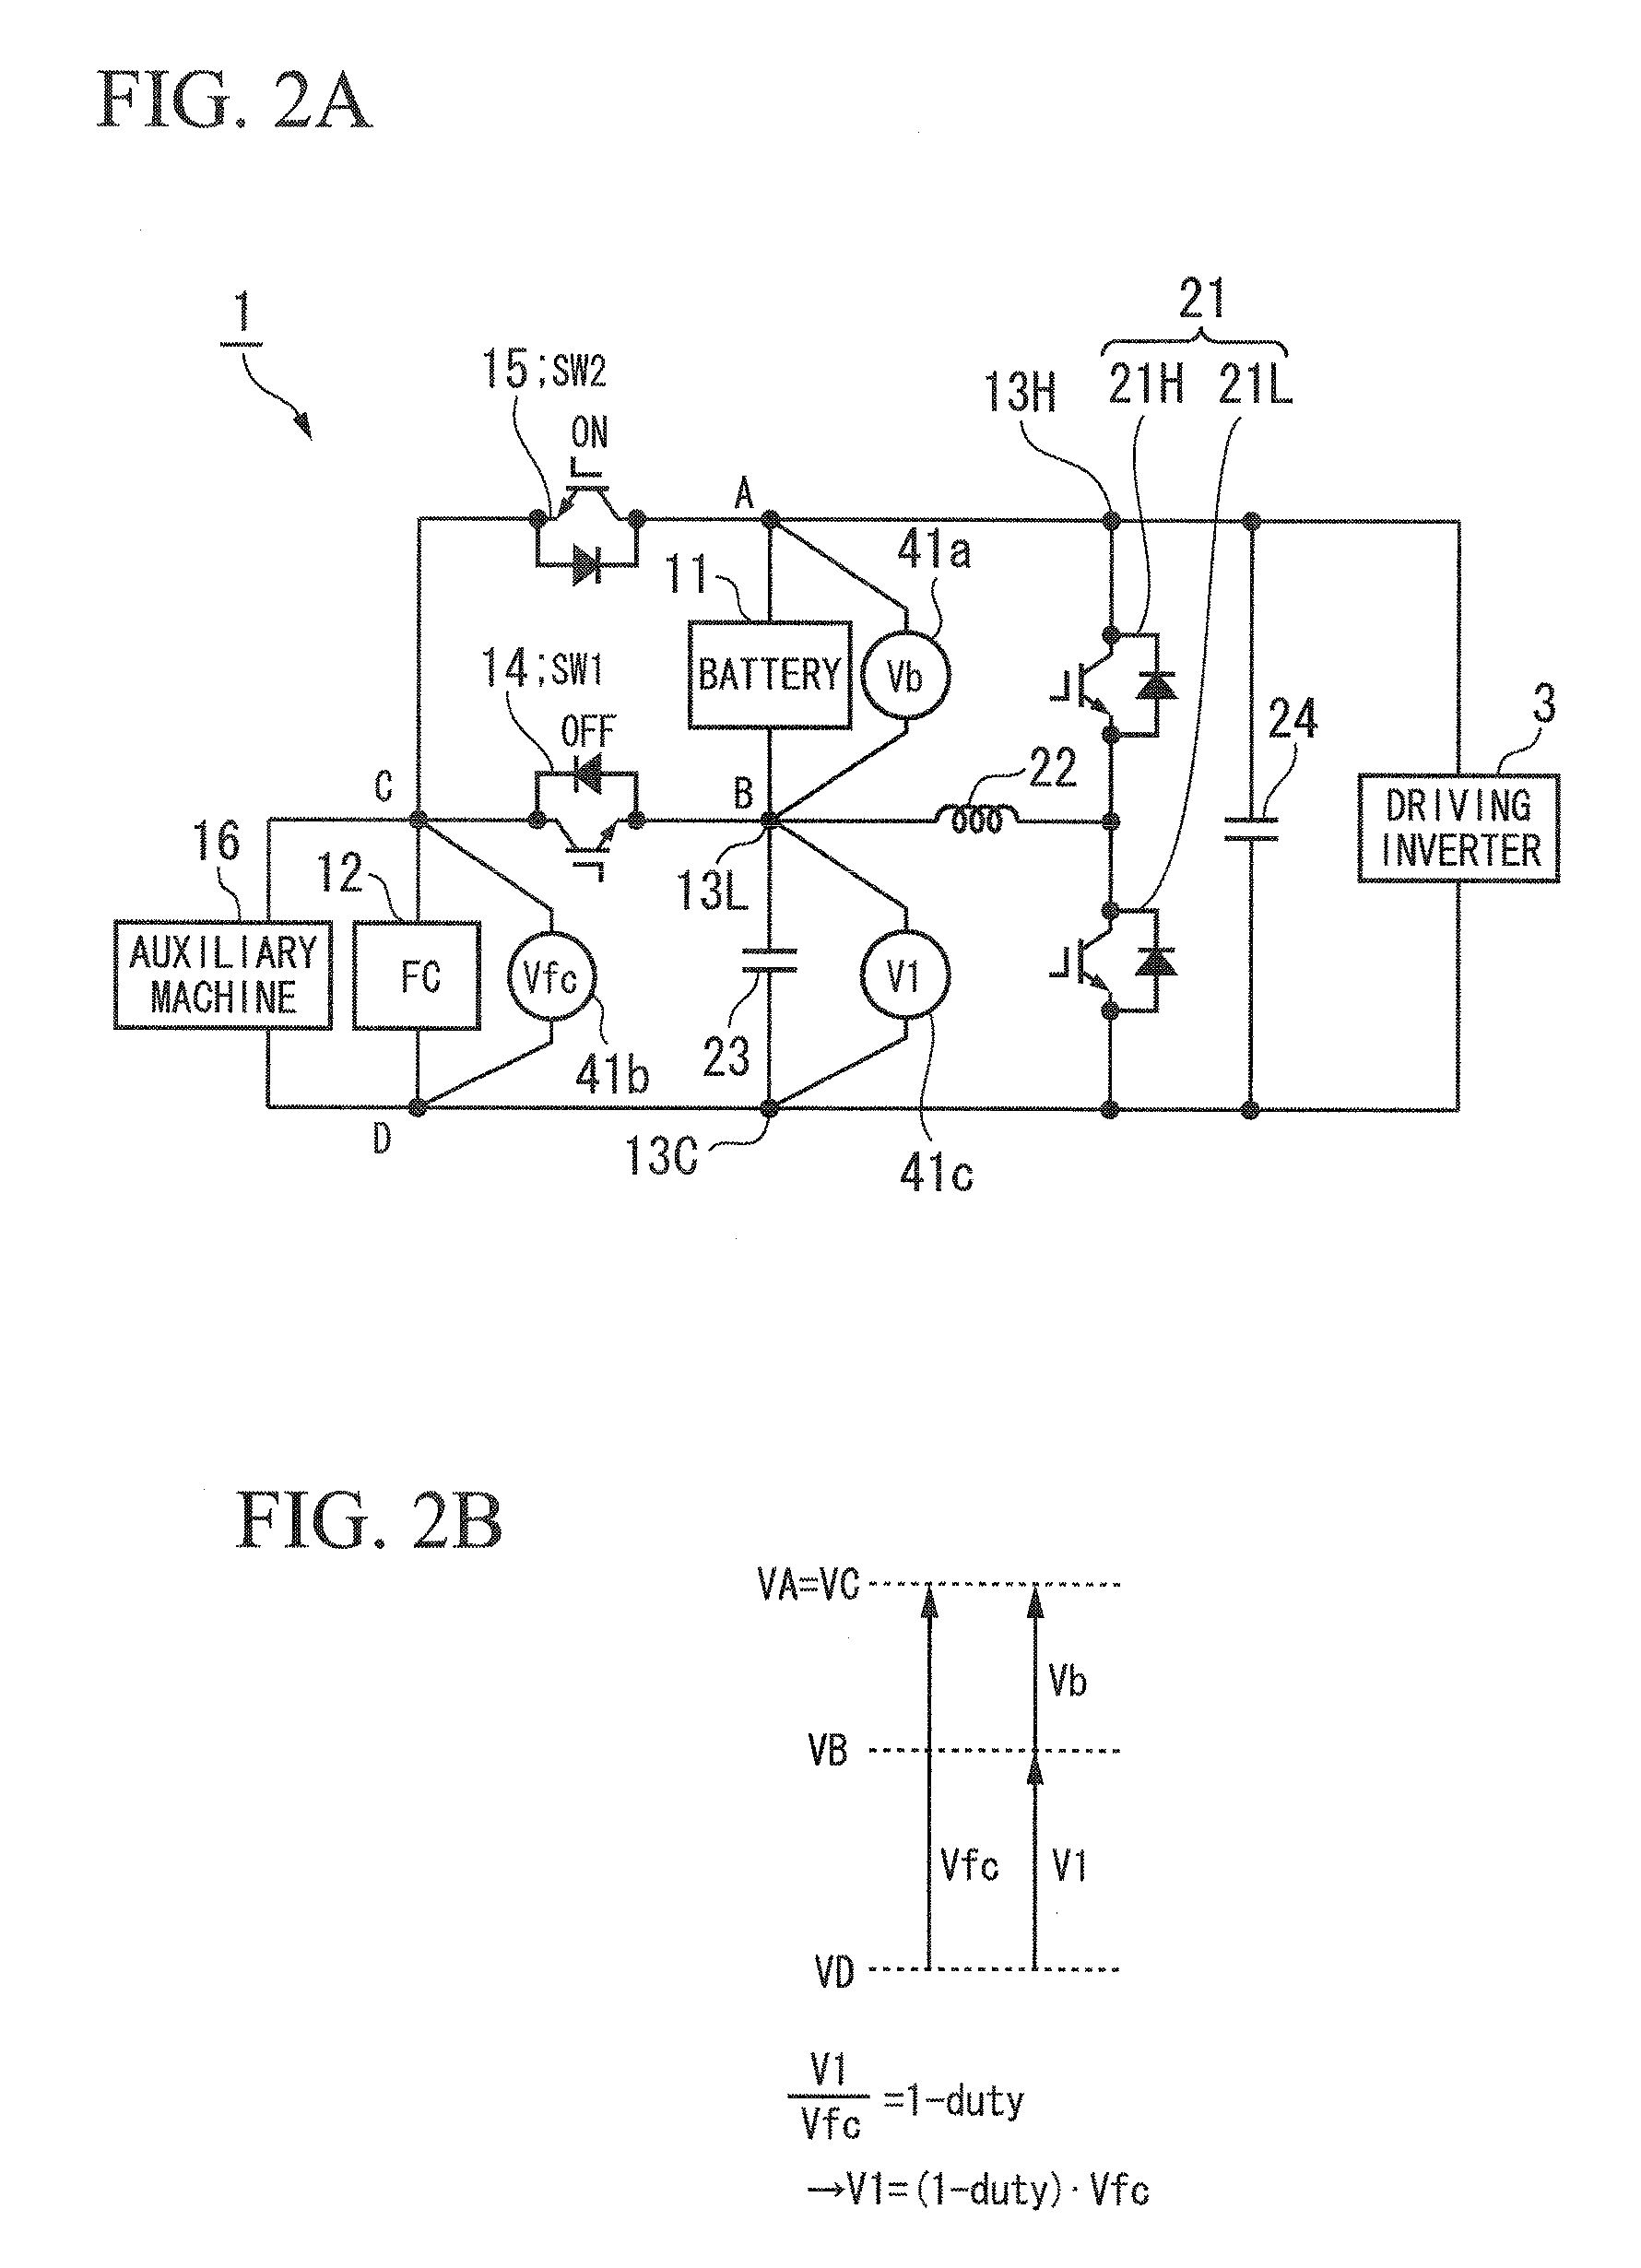 Power unit for electric vehicle